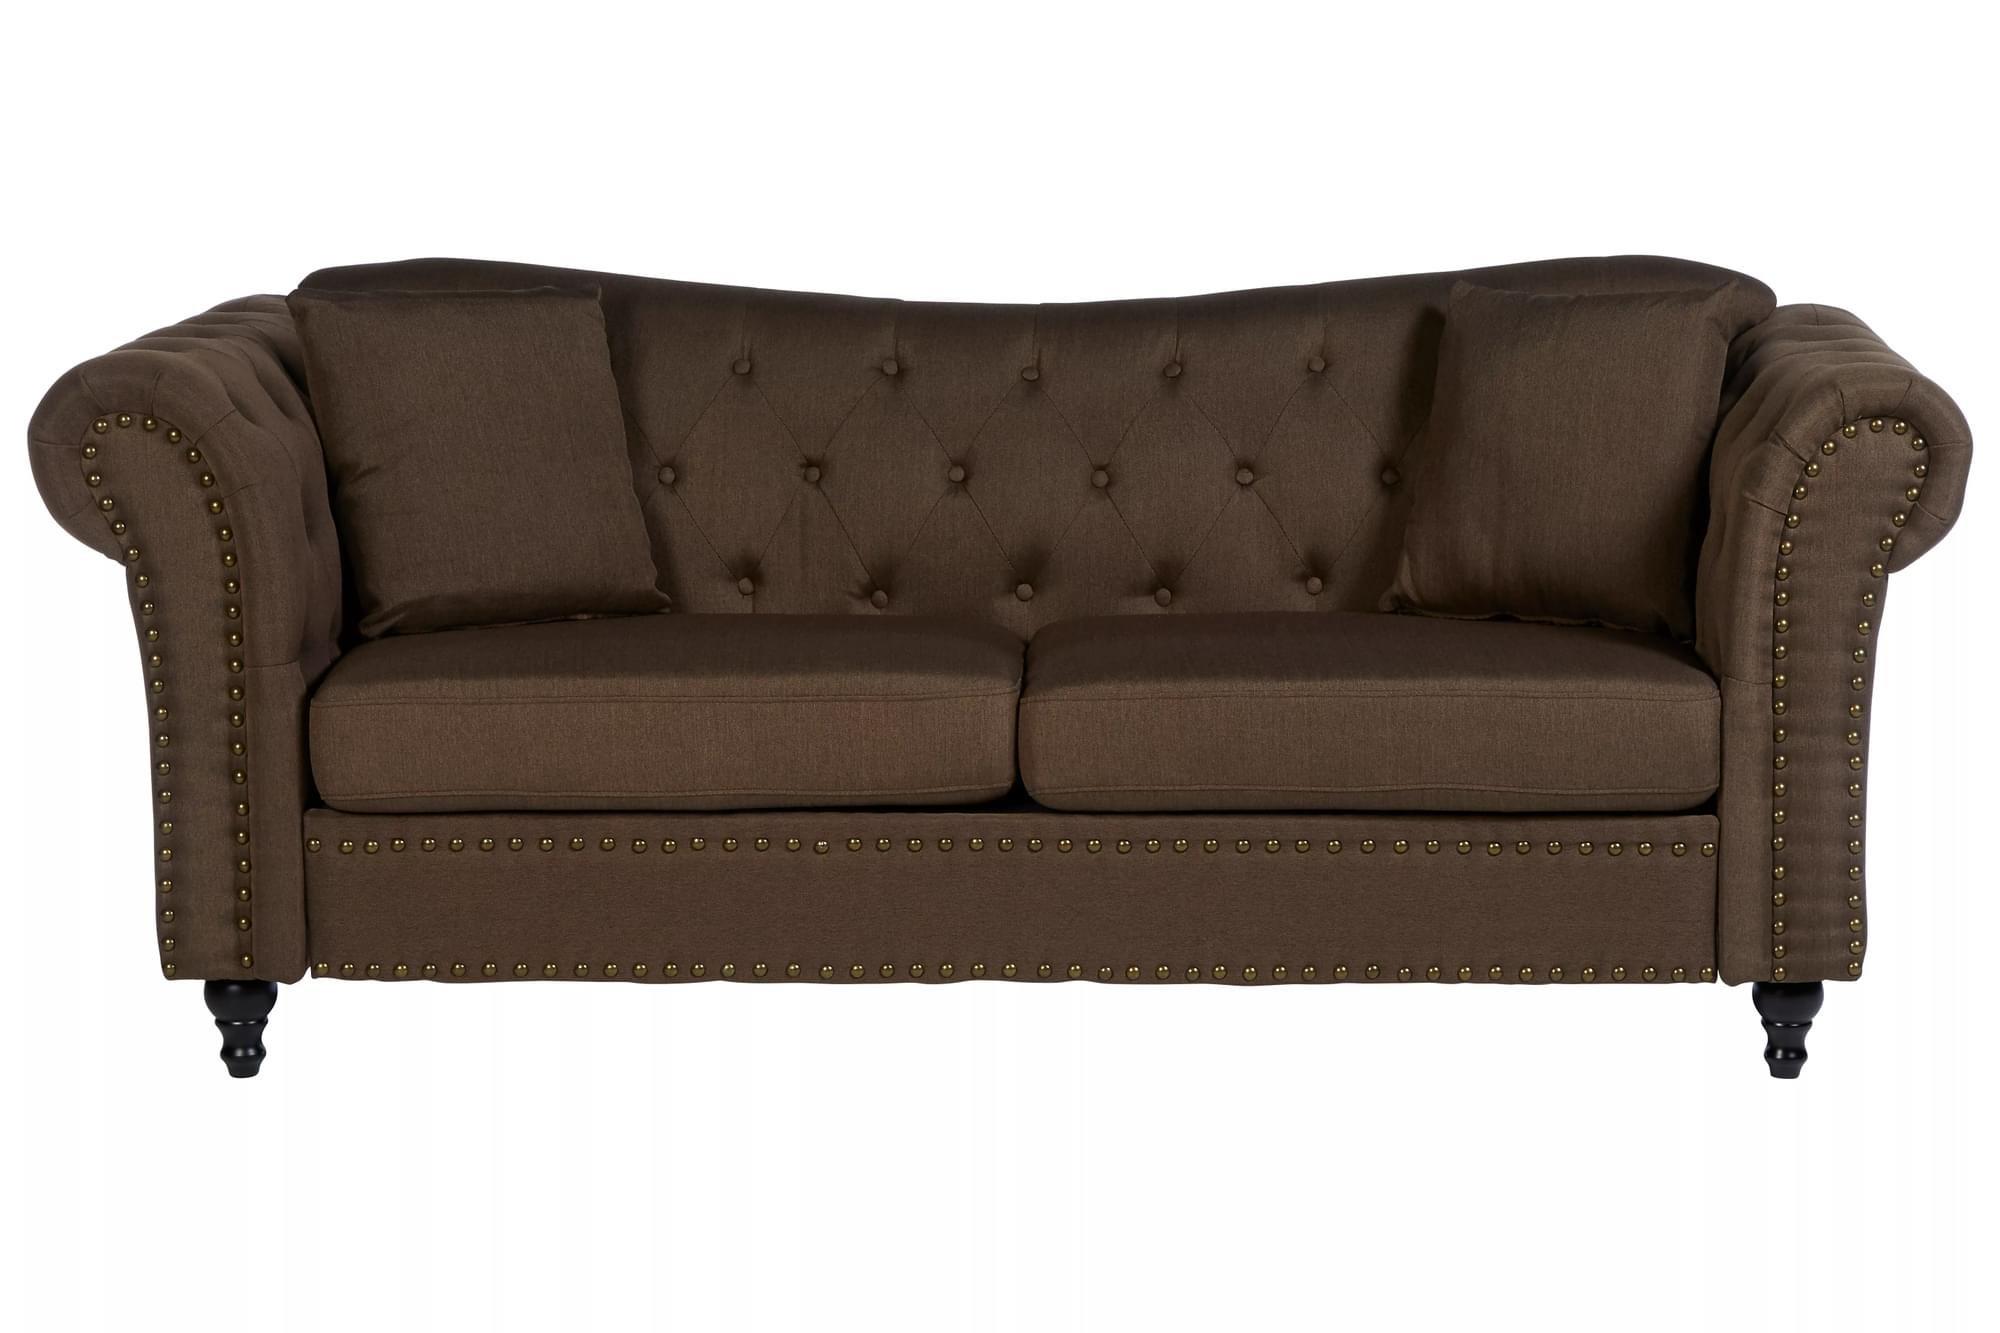 Interiors by Premier Fable 3 Seat Chesterfield Sofa